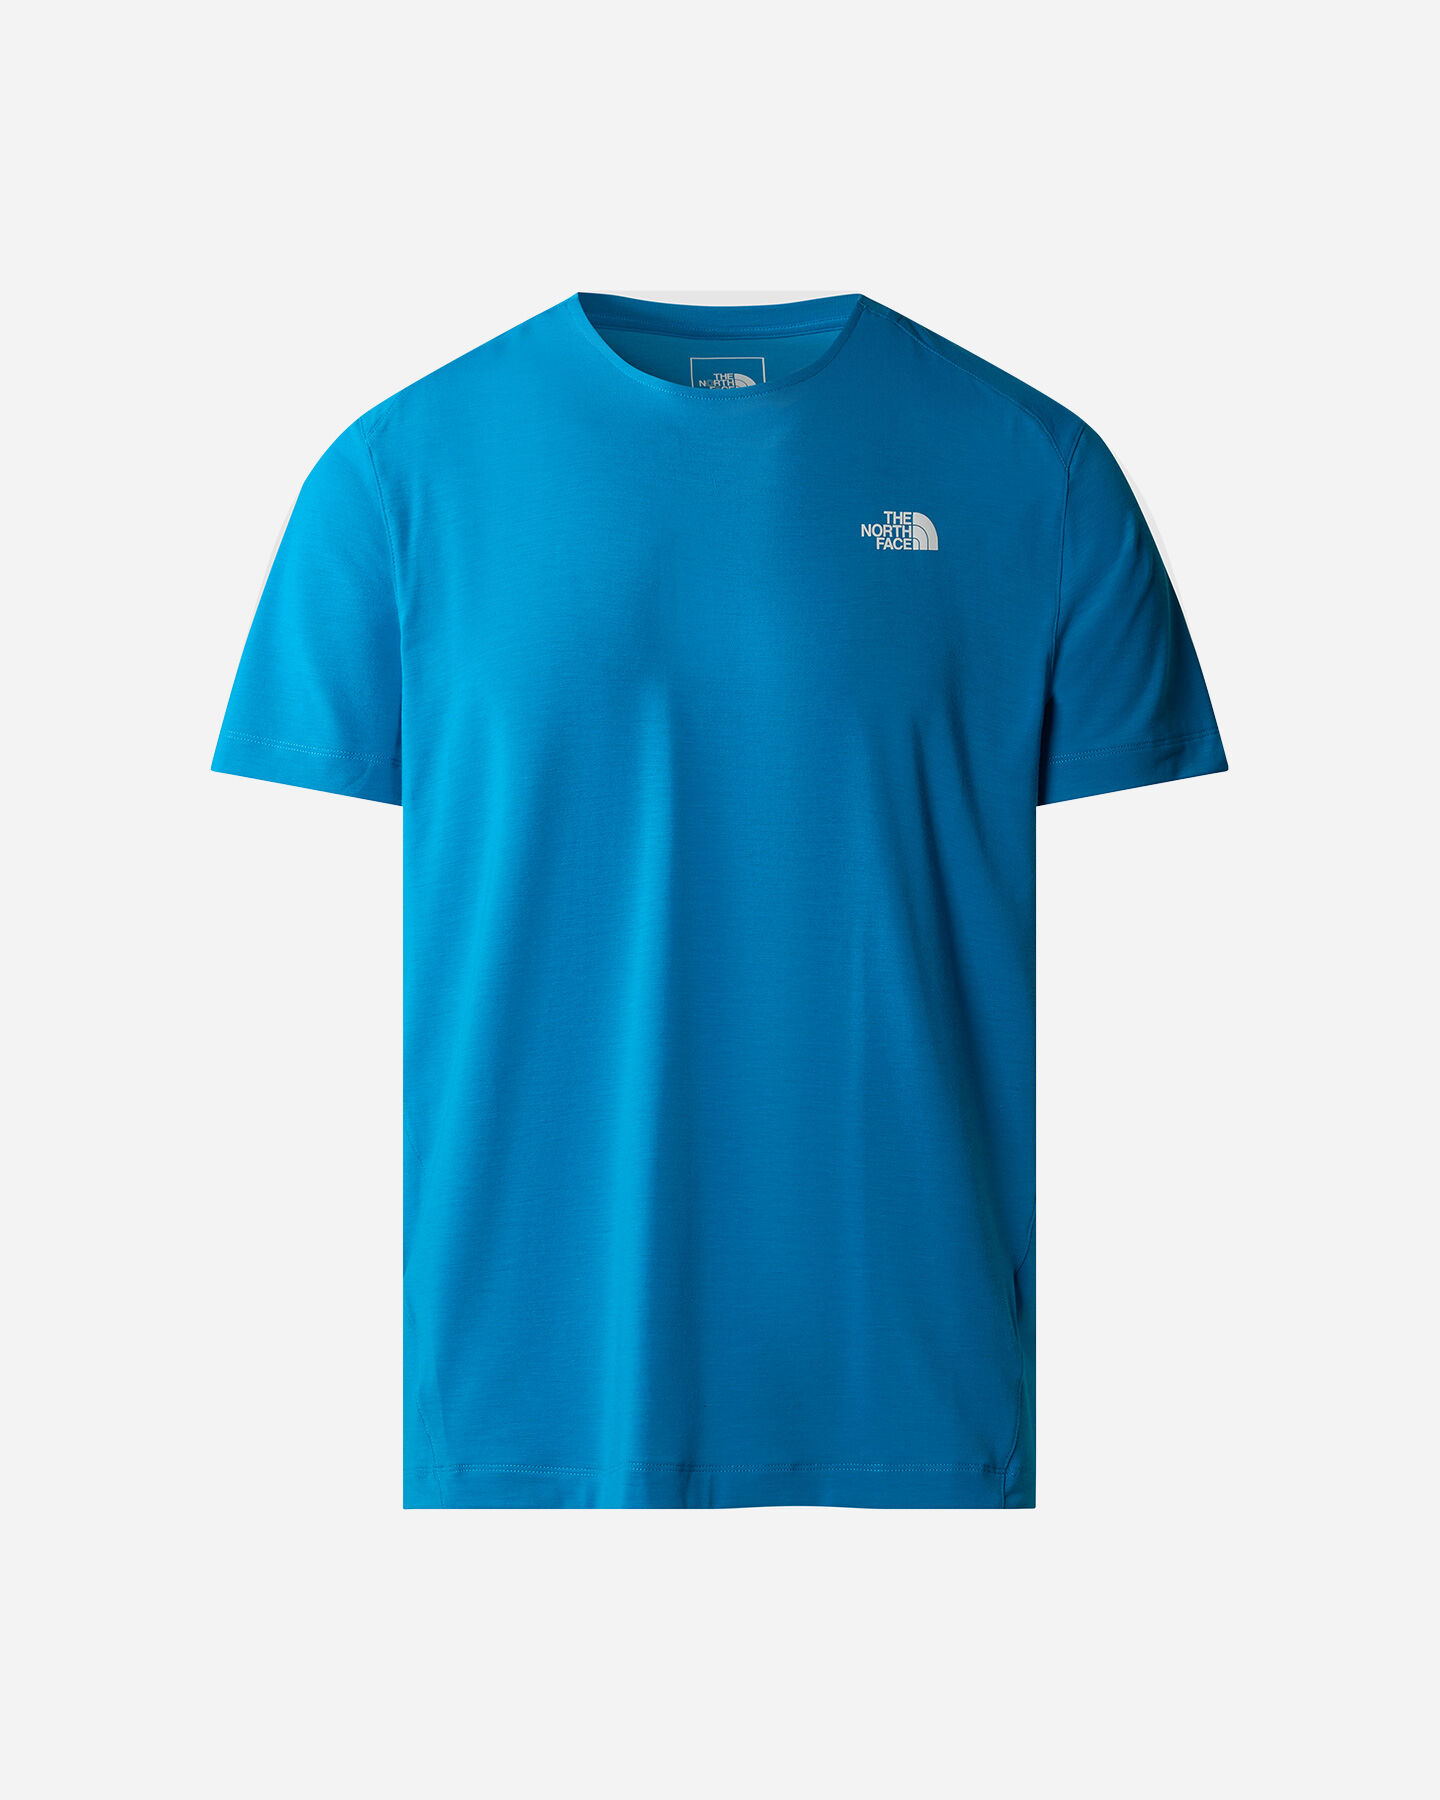  T-Shirt THE NORTH FACE LIGHTNING ALPINE M S5650868|RI3|S scatto 0